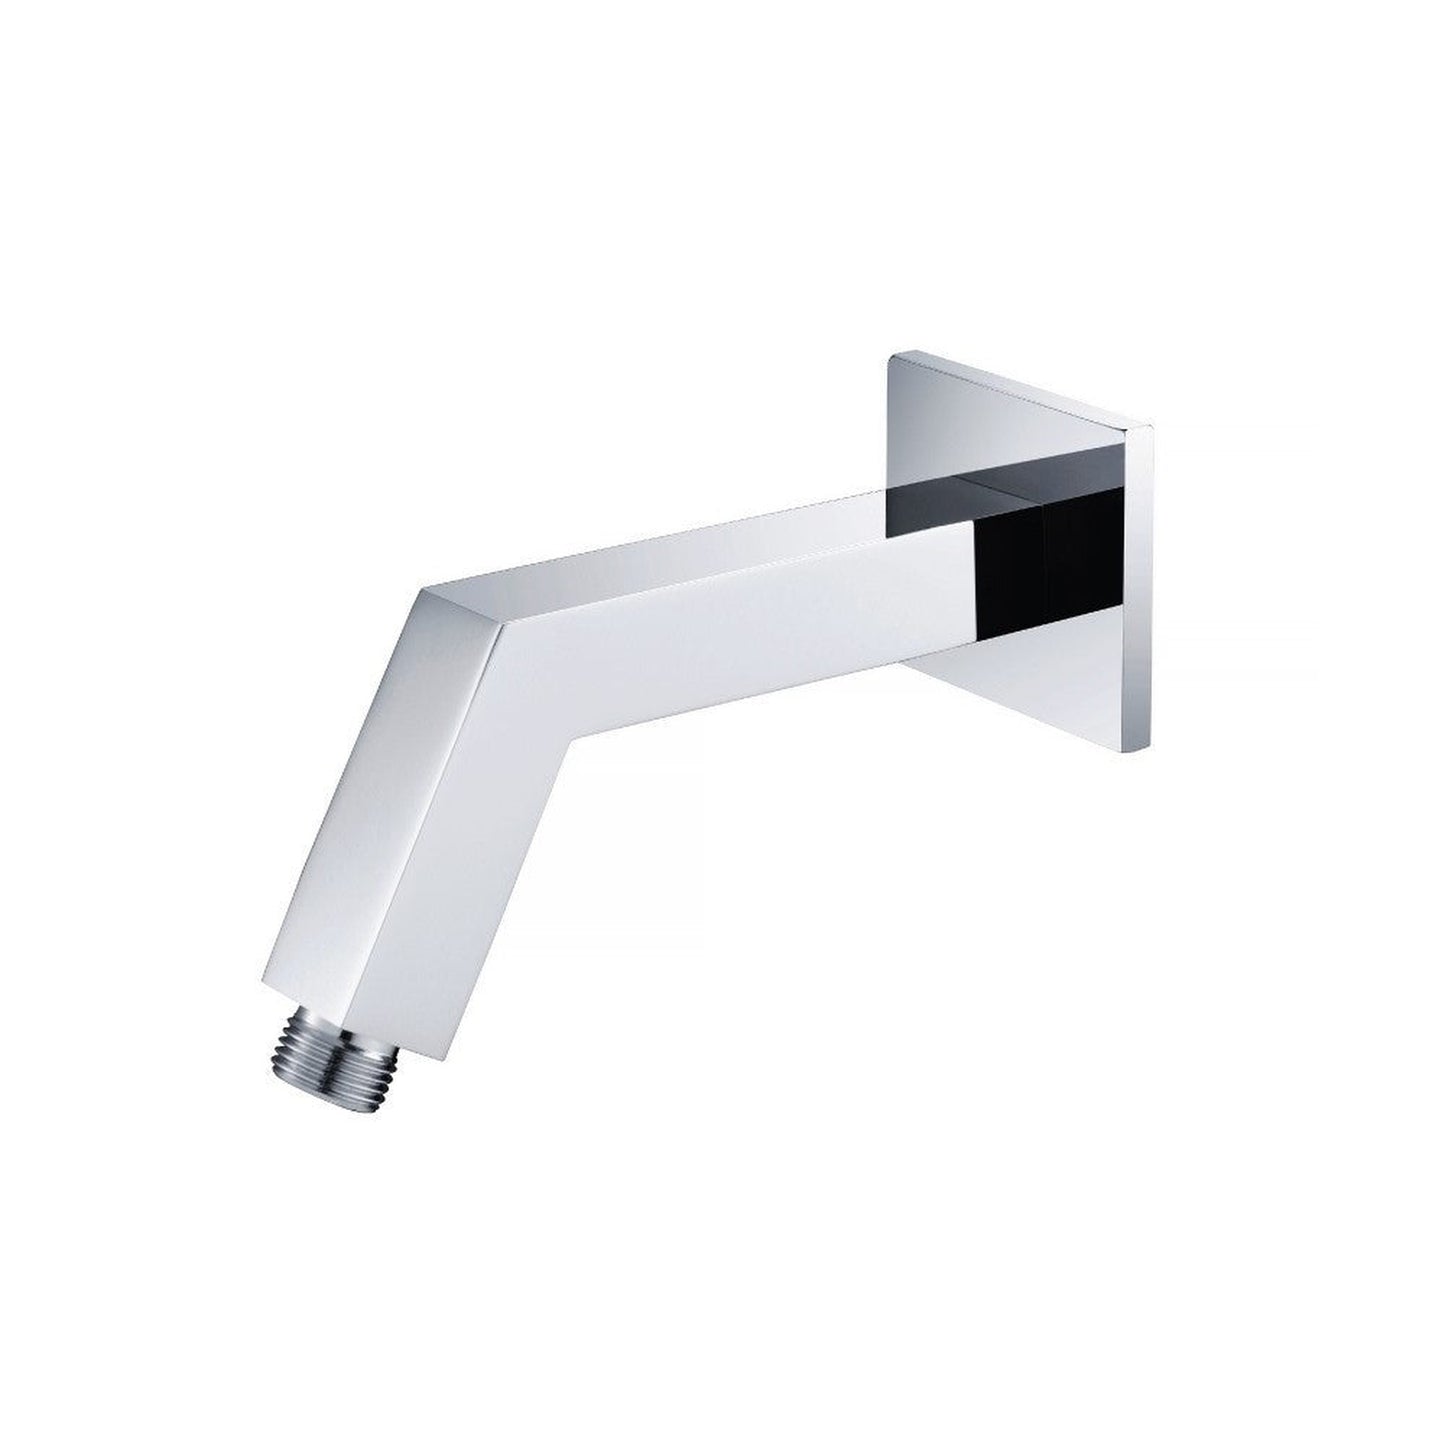 Isenberg Universal Fixtures 7" Chrome Solid Brass Wall-Mounted Standard Shower Arm With Square Sliding Flange